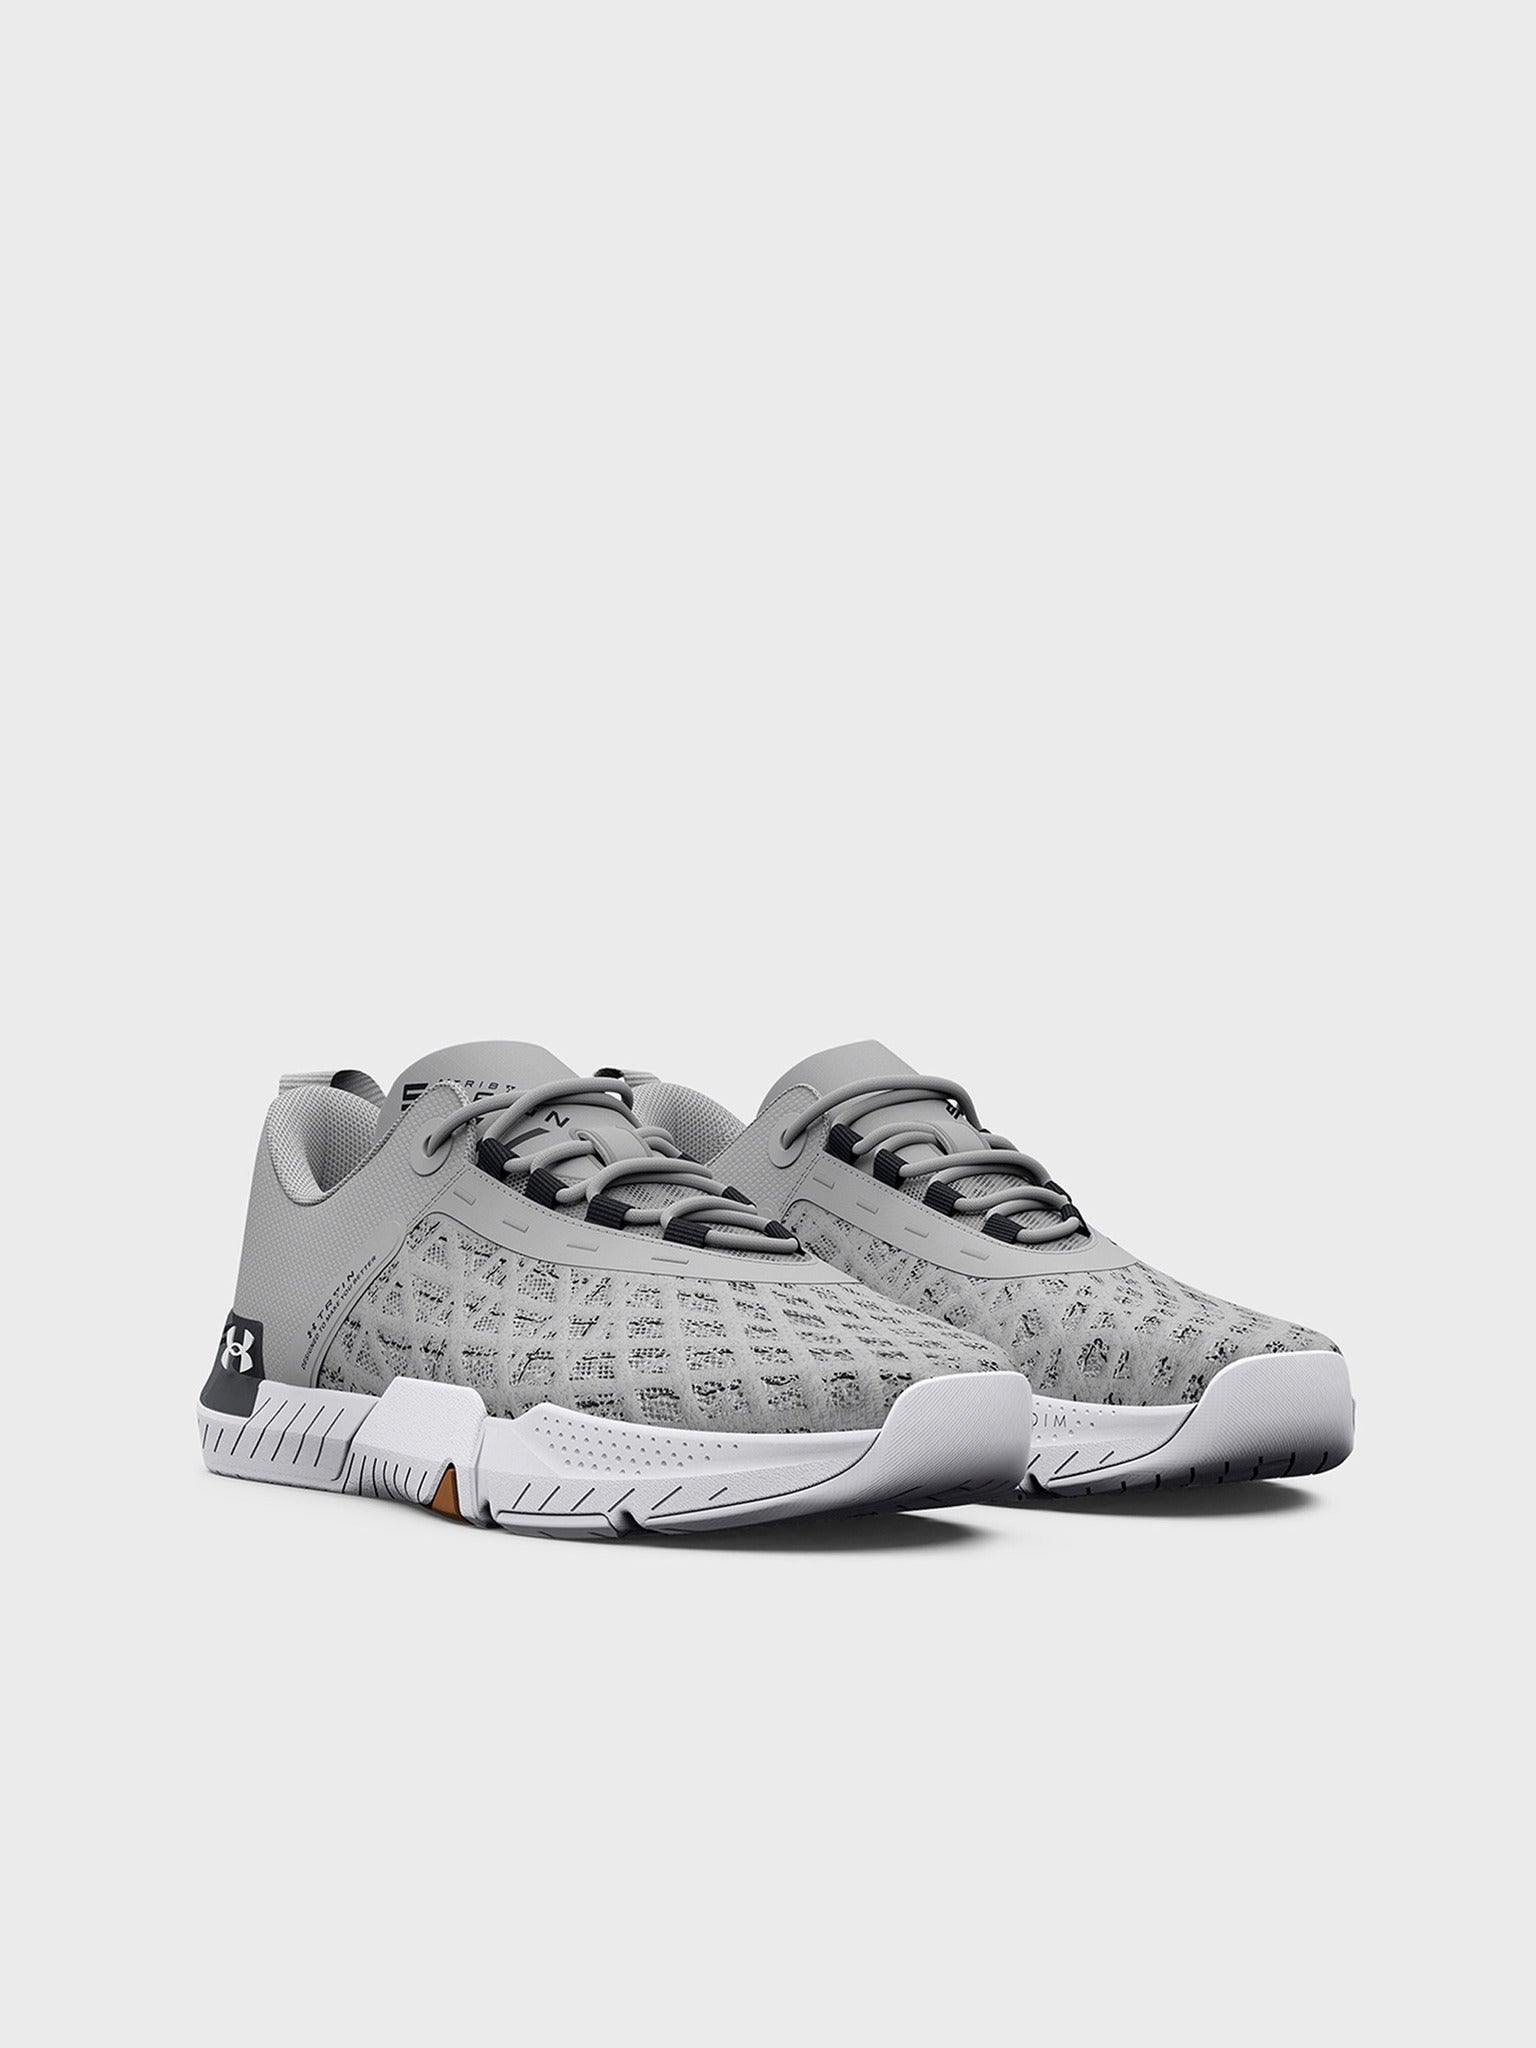 Under Armour Tribase Reign 5 101 Grey